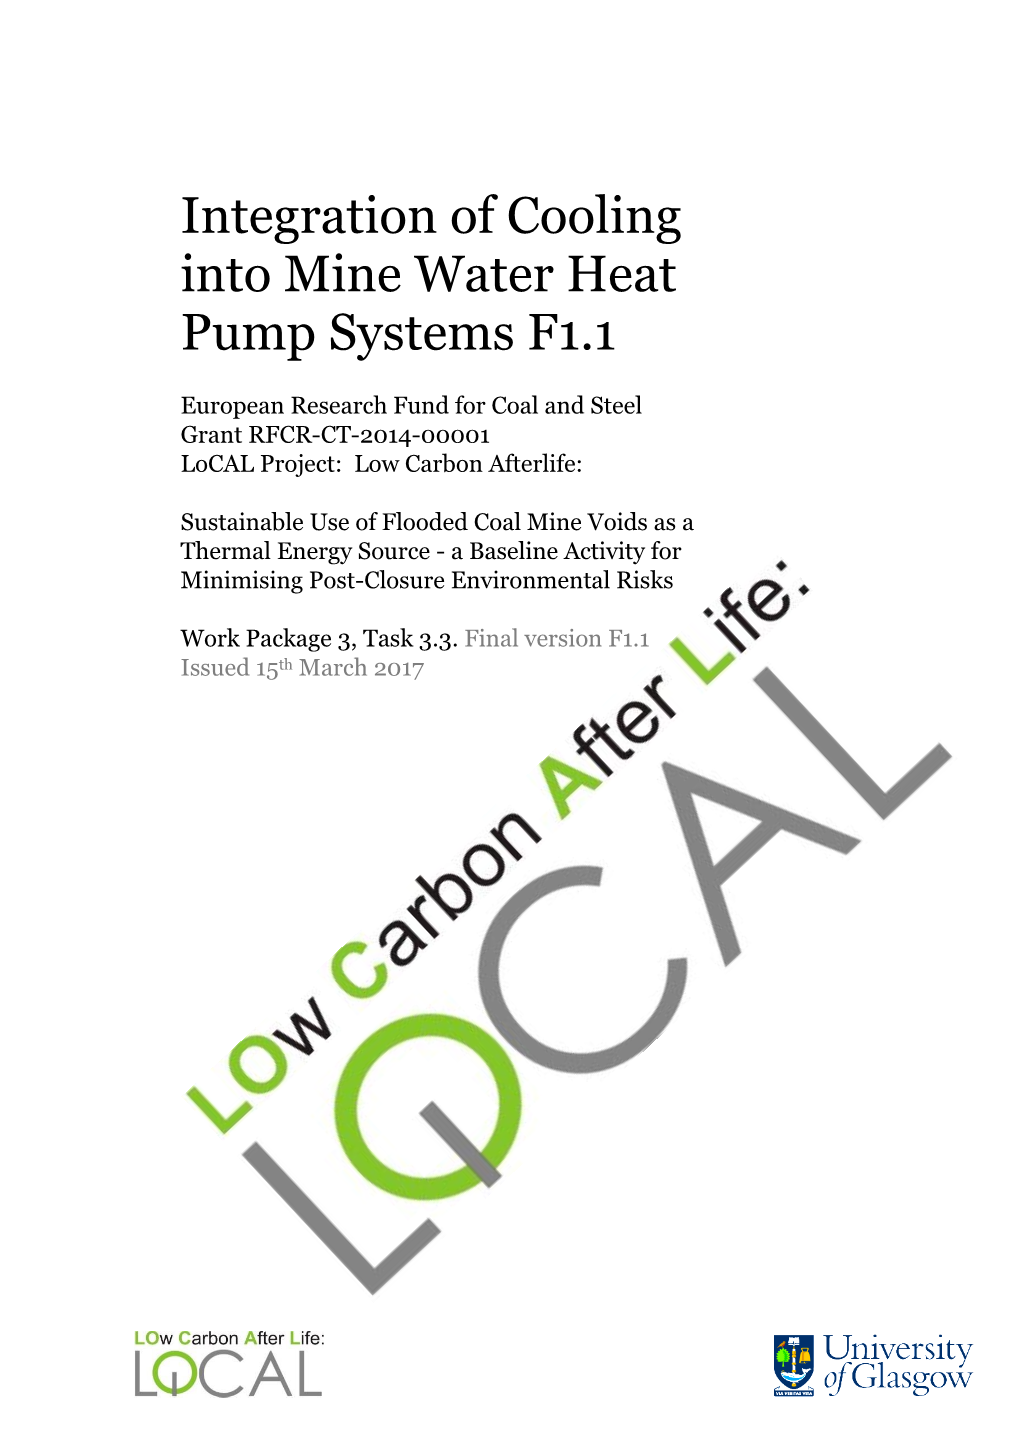 Integration of Cooling Into Mine Water Heat Pump Systems F1.1